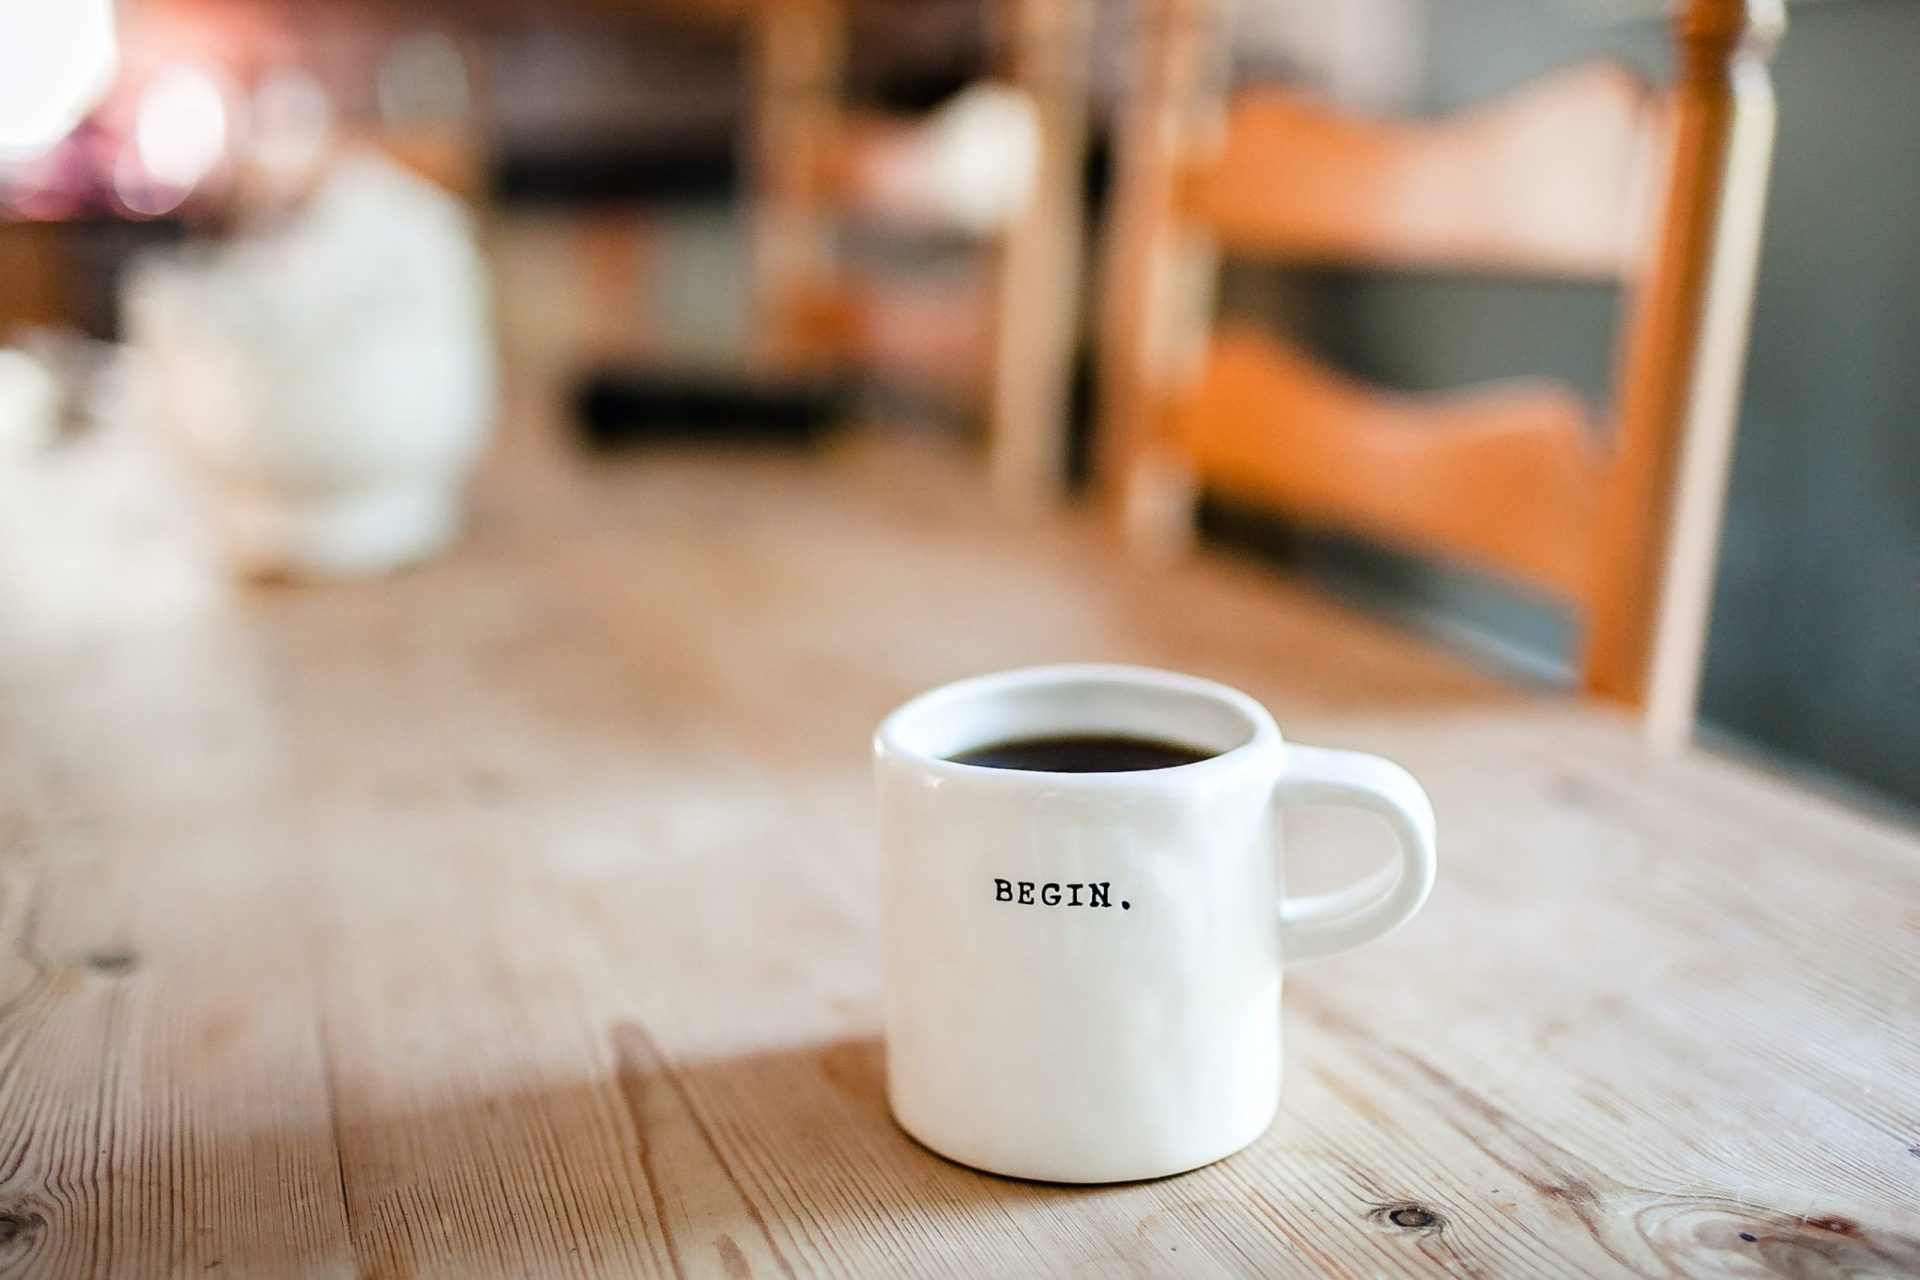 Coffee mug sitting on table with the word "begin" written on it. Represents what happens in your first therapy session.